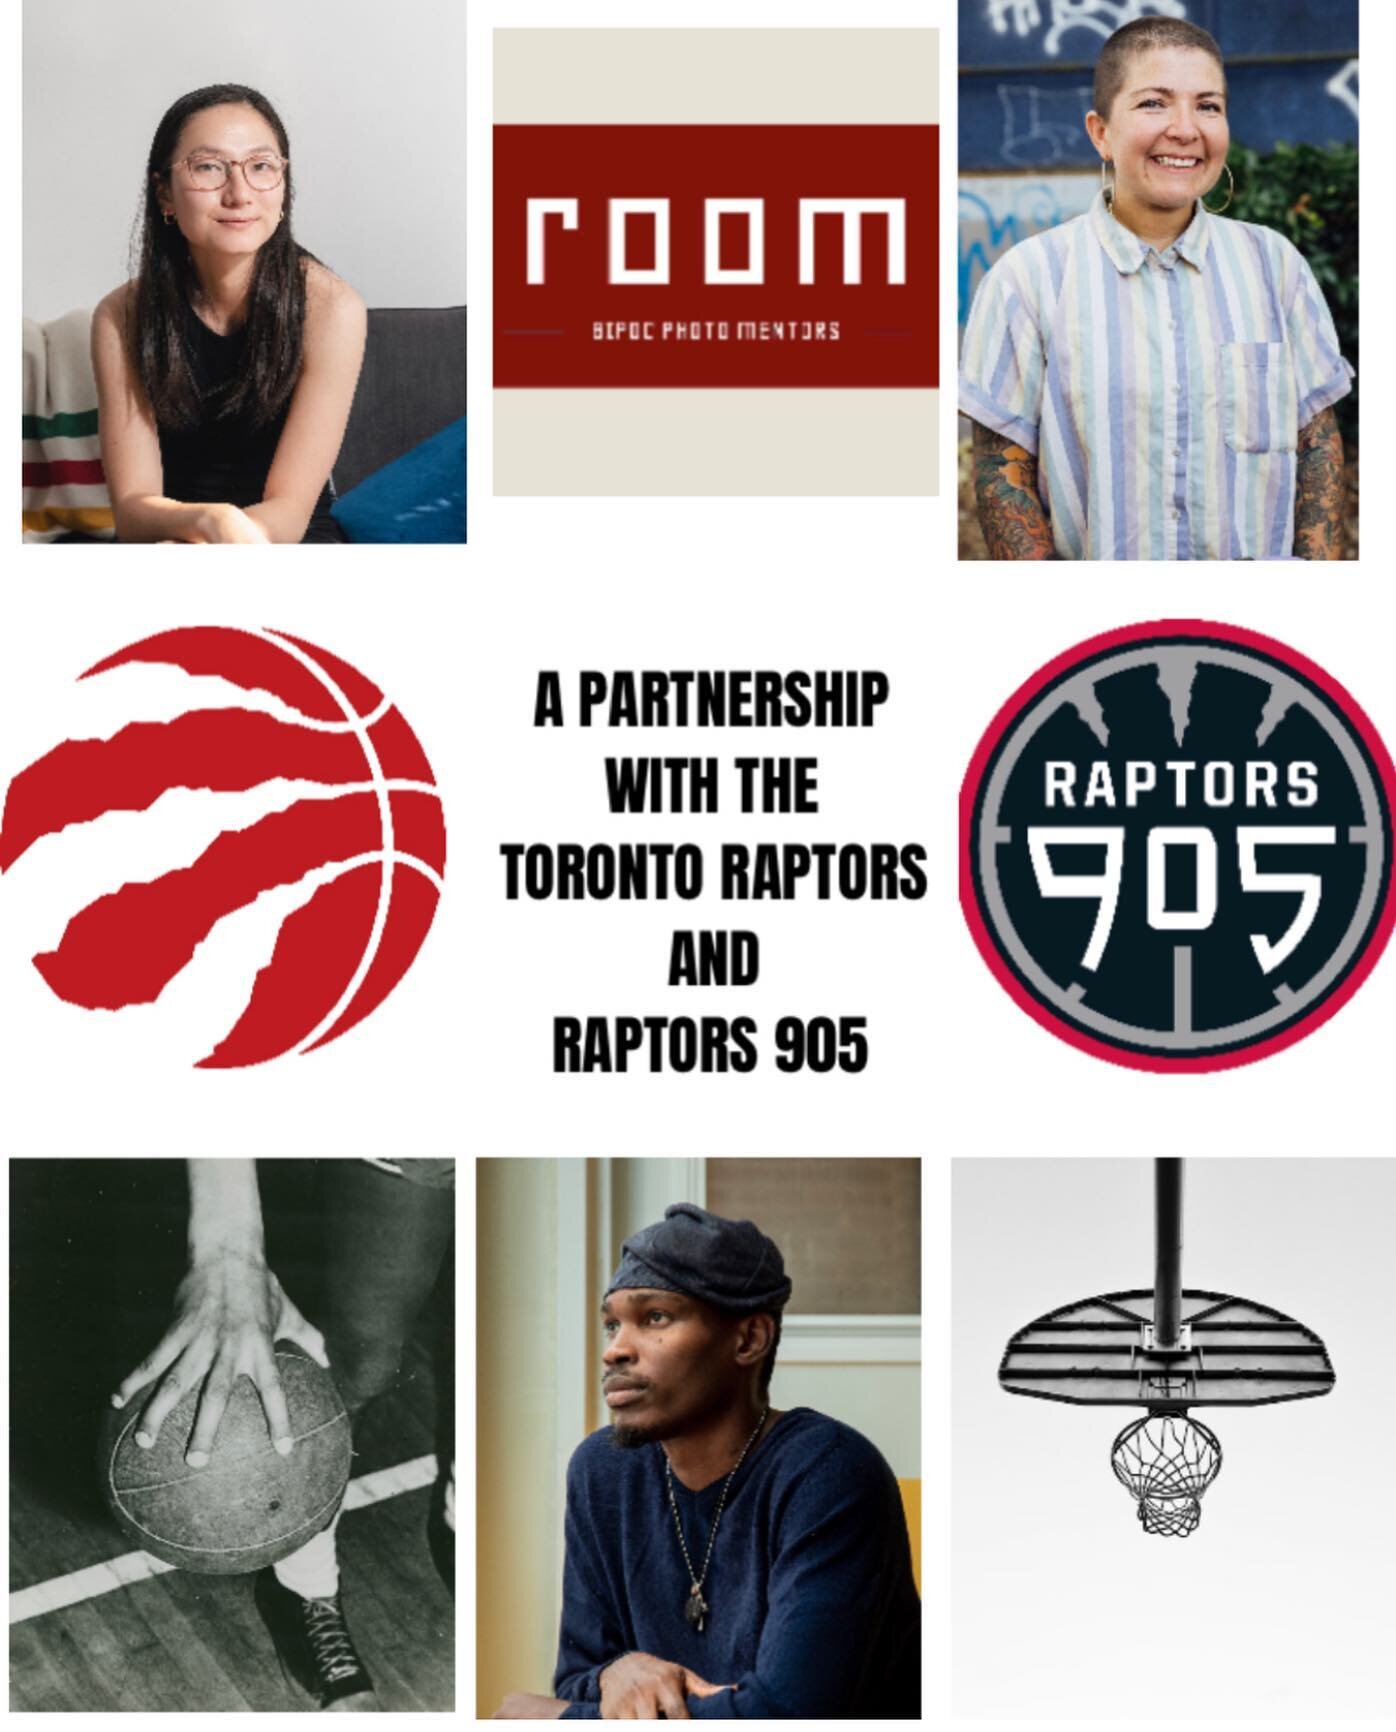 Room Up Front is thrilled to announce a partnership with the @raptors and the @raptors905. Three aspiring photojournalists will gain valuable (paid) experience covering both teams on and off the courts. 
Thank-you to the Toronto Raptors and Raptors 9